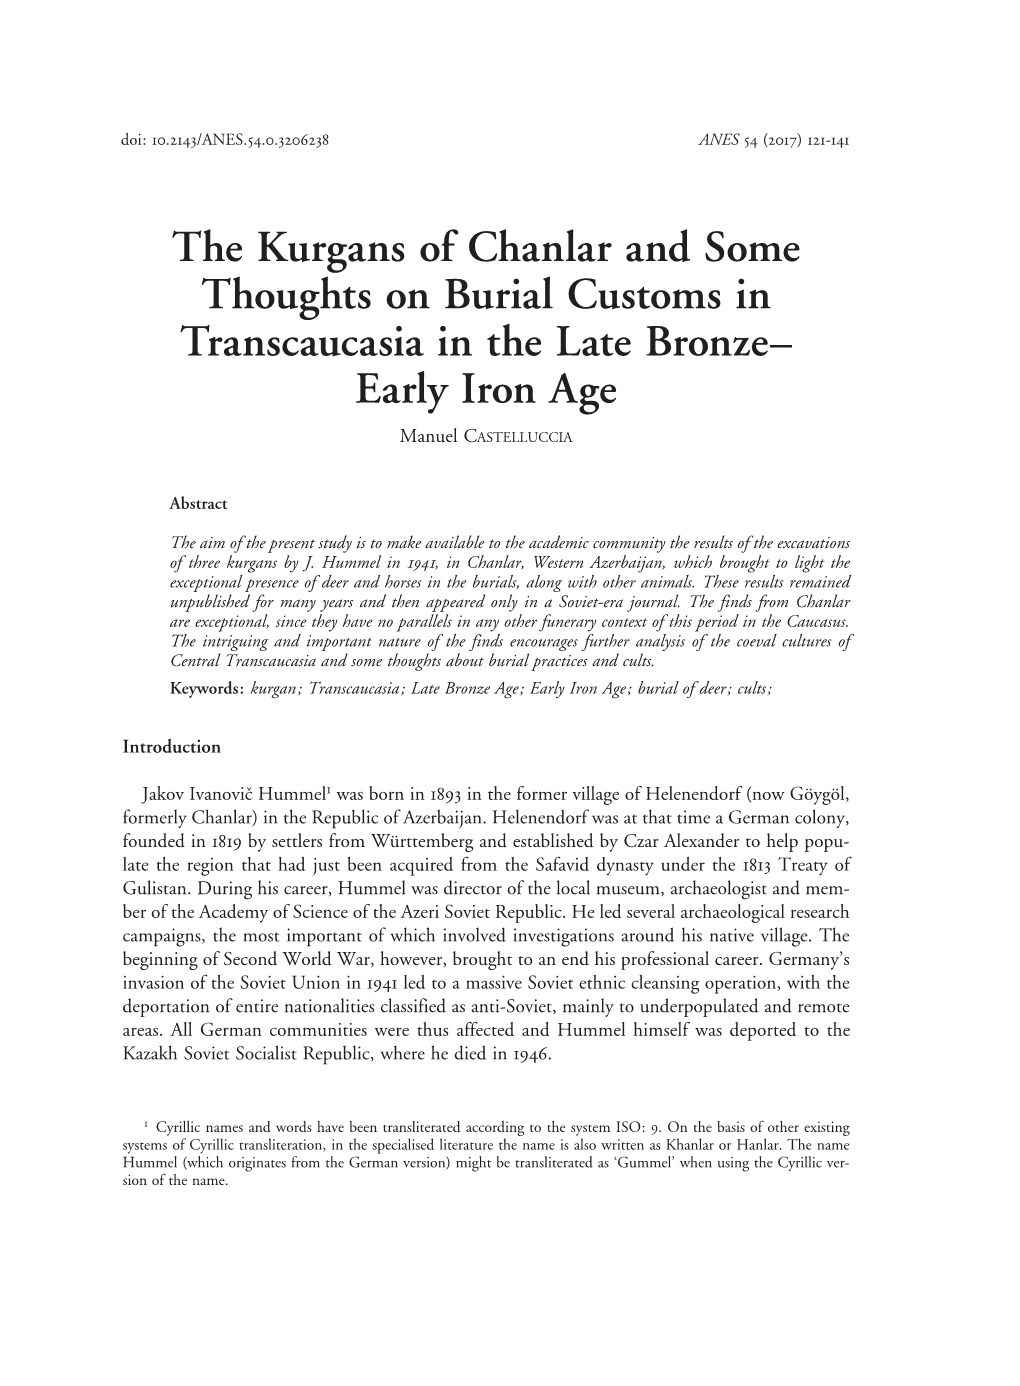 The Kurgans of Chanlar and Some Thoughts on Burial Customs in Transcaucasia in the Late Bronze– Early Iron Age Manuel Castelluccia